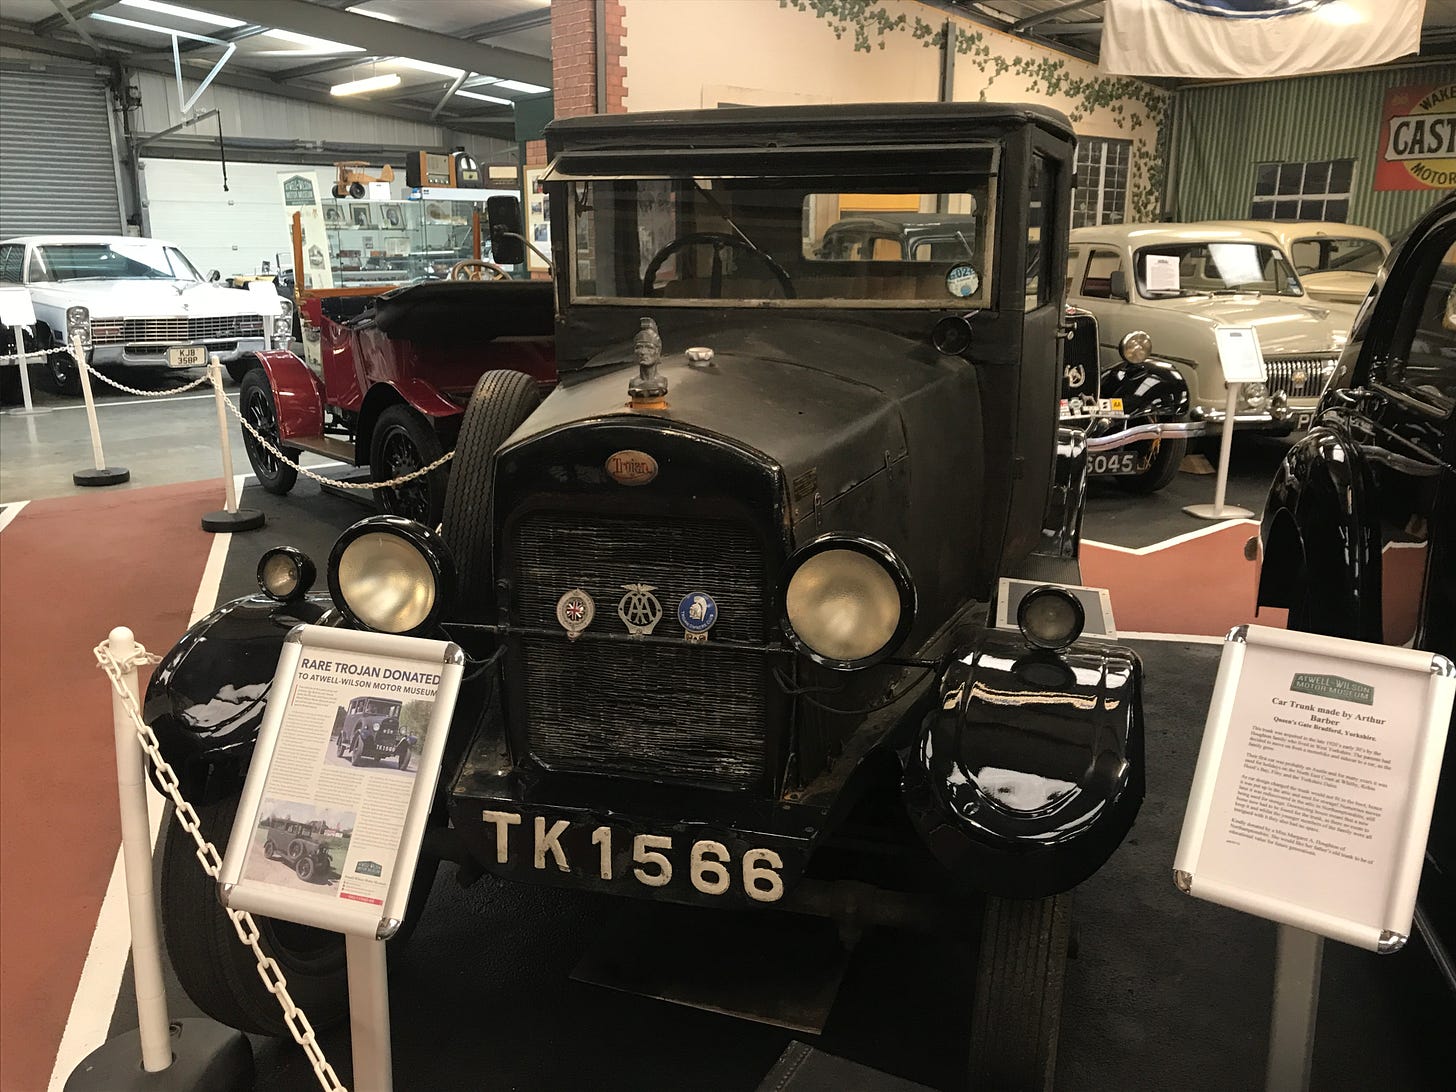 A rare Trojan vintage car at the Atwell Wilson Motor Museum, Stockley Lane, Calne, Wiltshire. Here we see the car on display with information boards in the foreground telling visitors about the car’s history. The registration plate of the vehicle is TK1566. In the background, we can see a few of the other vehicles in the collection. 